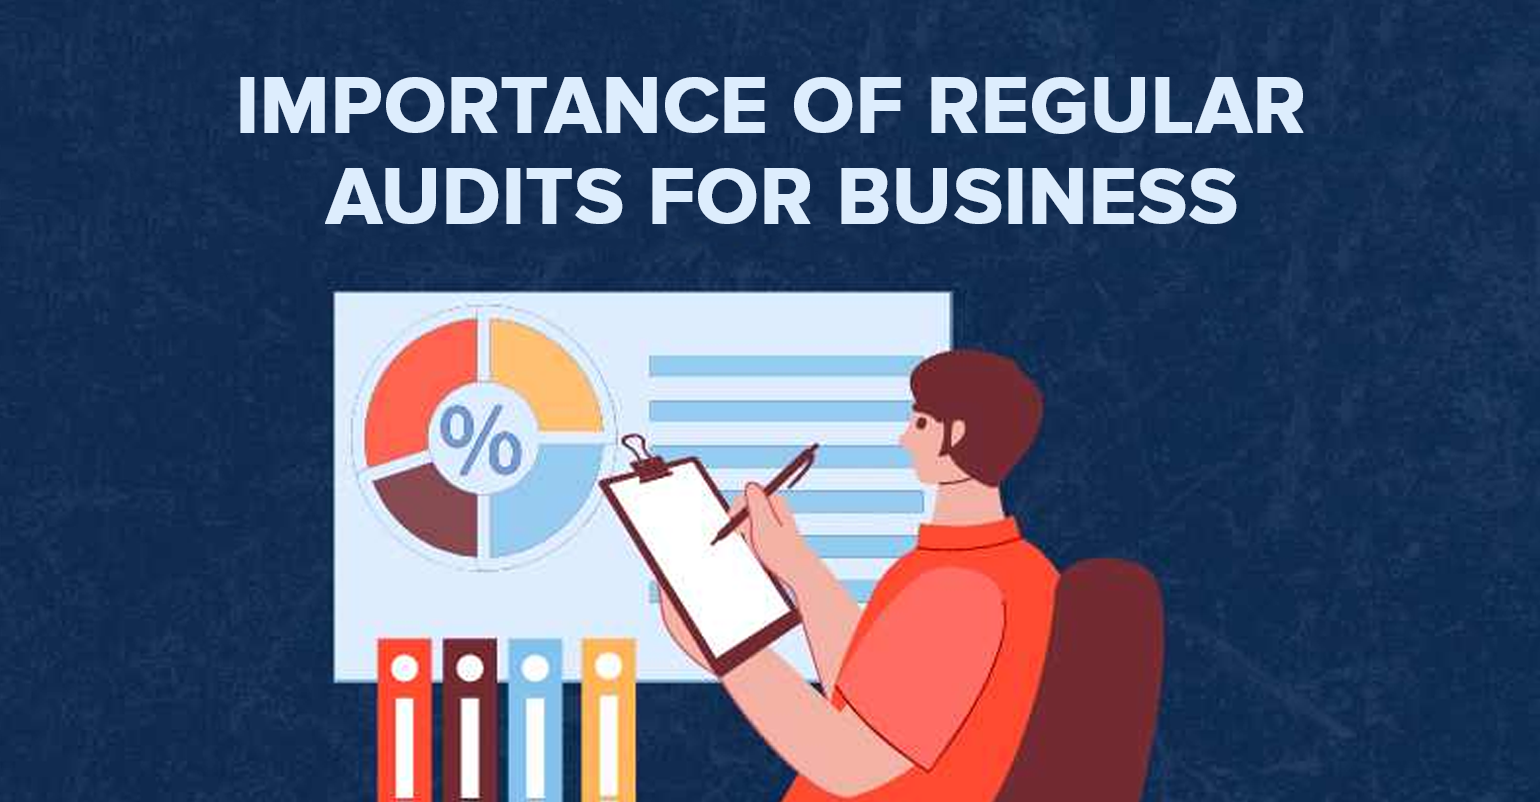 Importance of Regular Audits for Business 